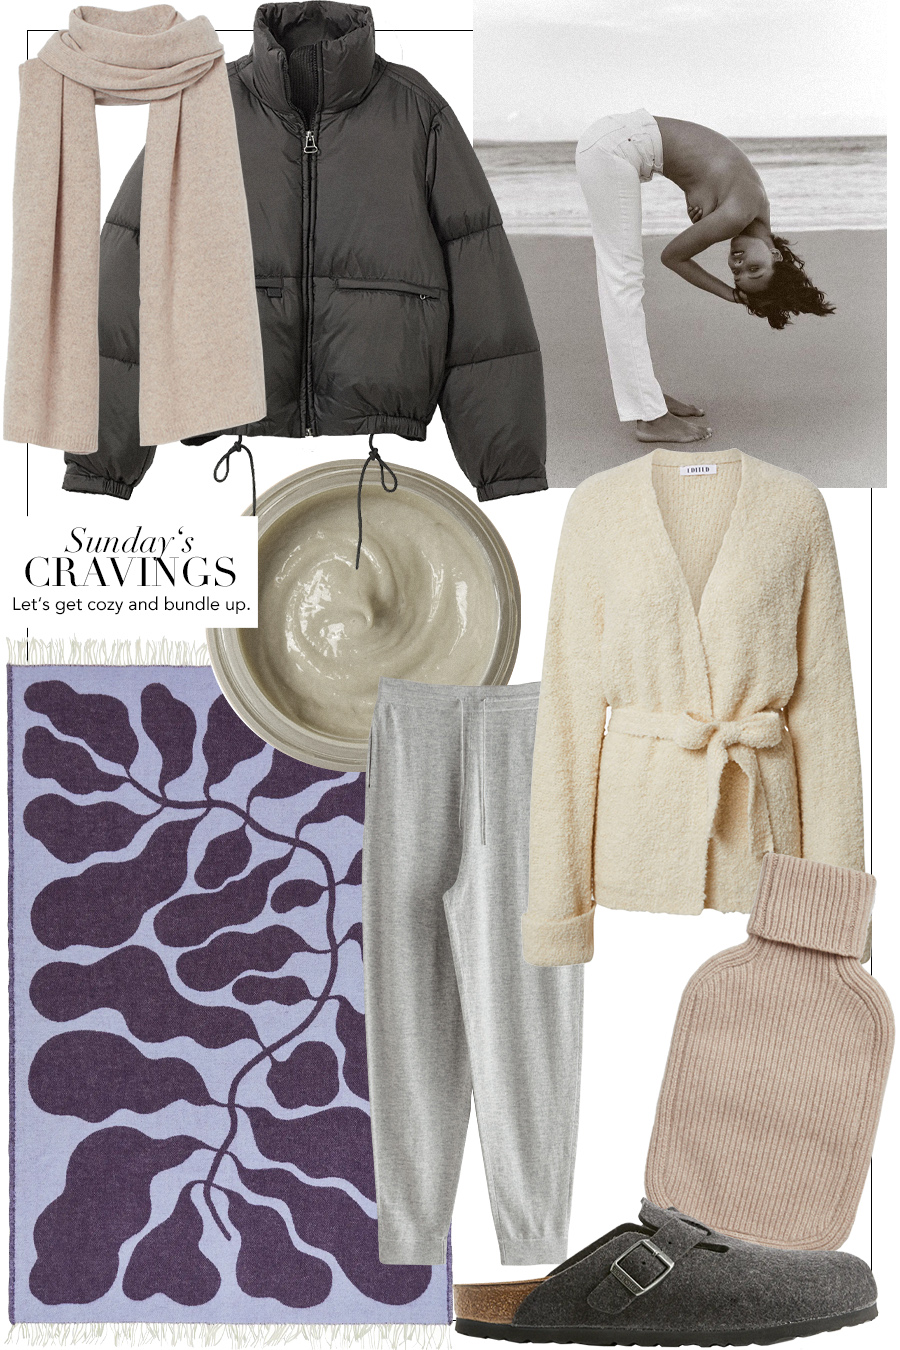 Sunday’s Cravings: Let’s get cozy